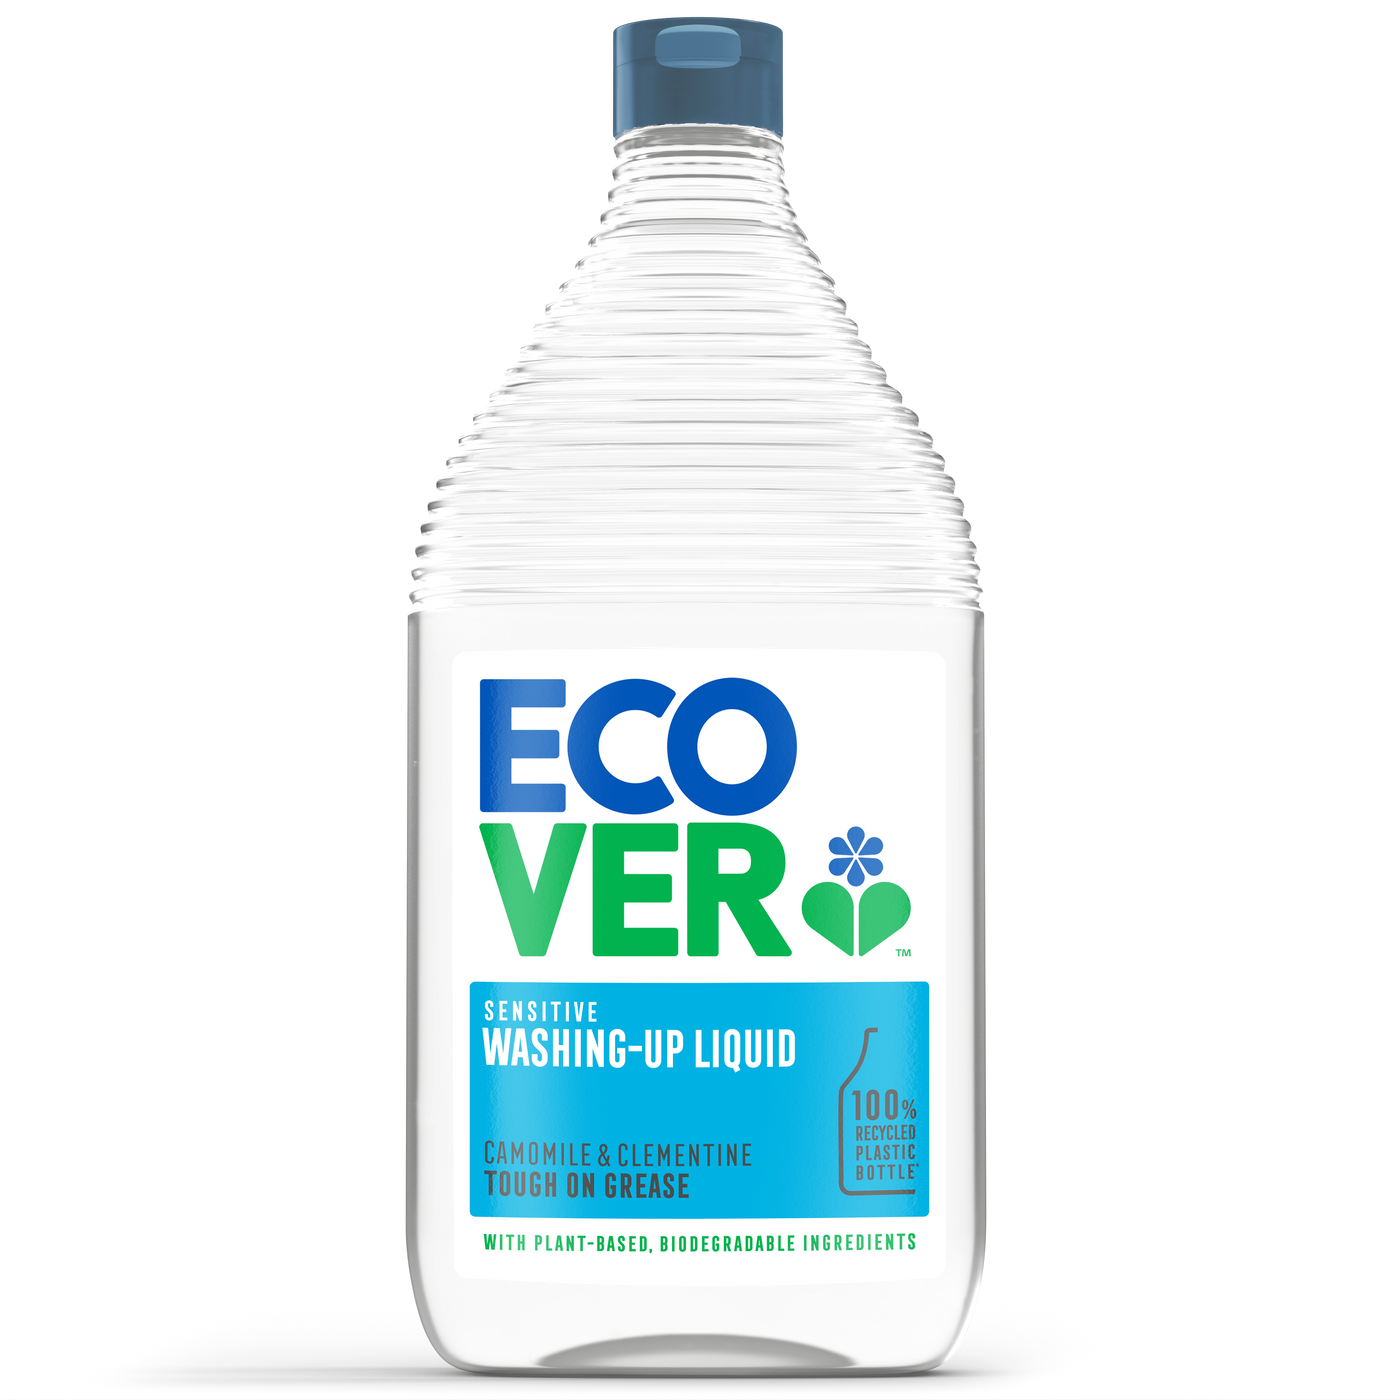 Ecover Washing Up Liquid 950ml - Camomile & Clementine